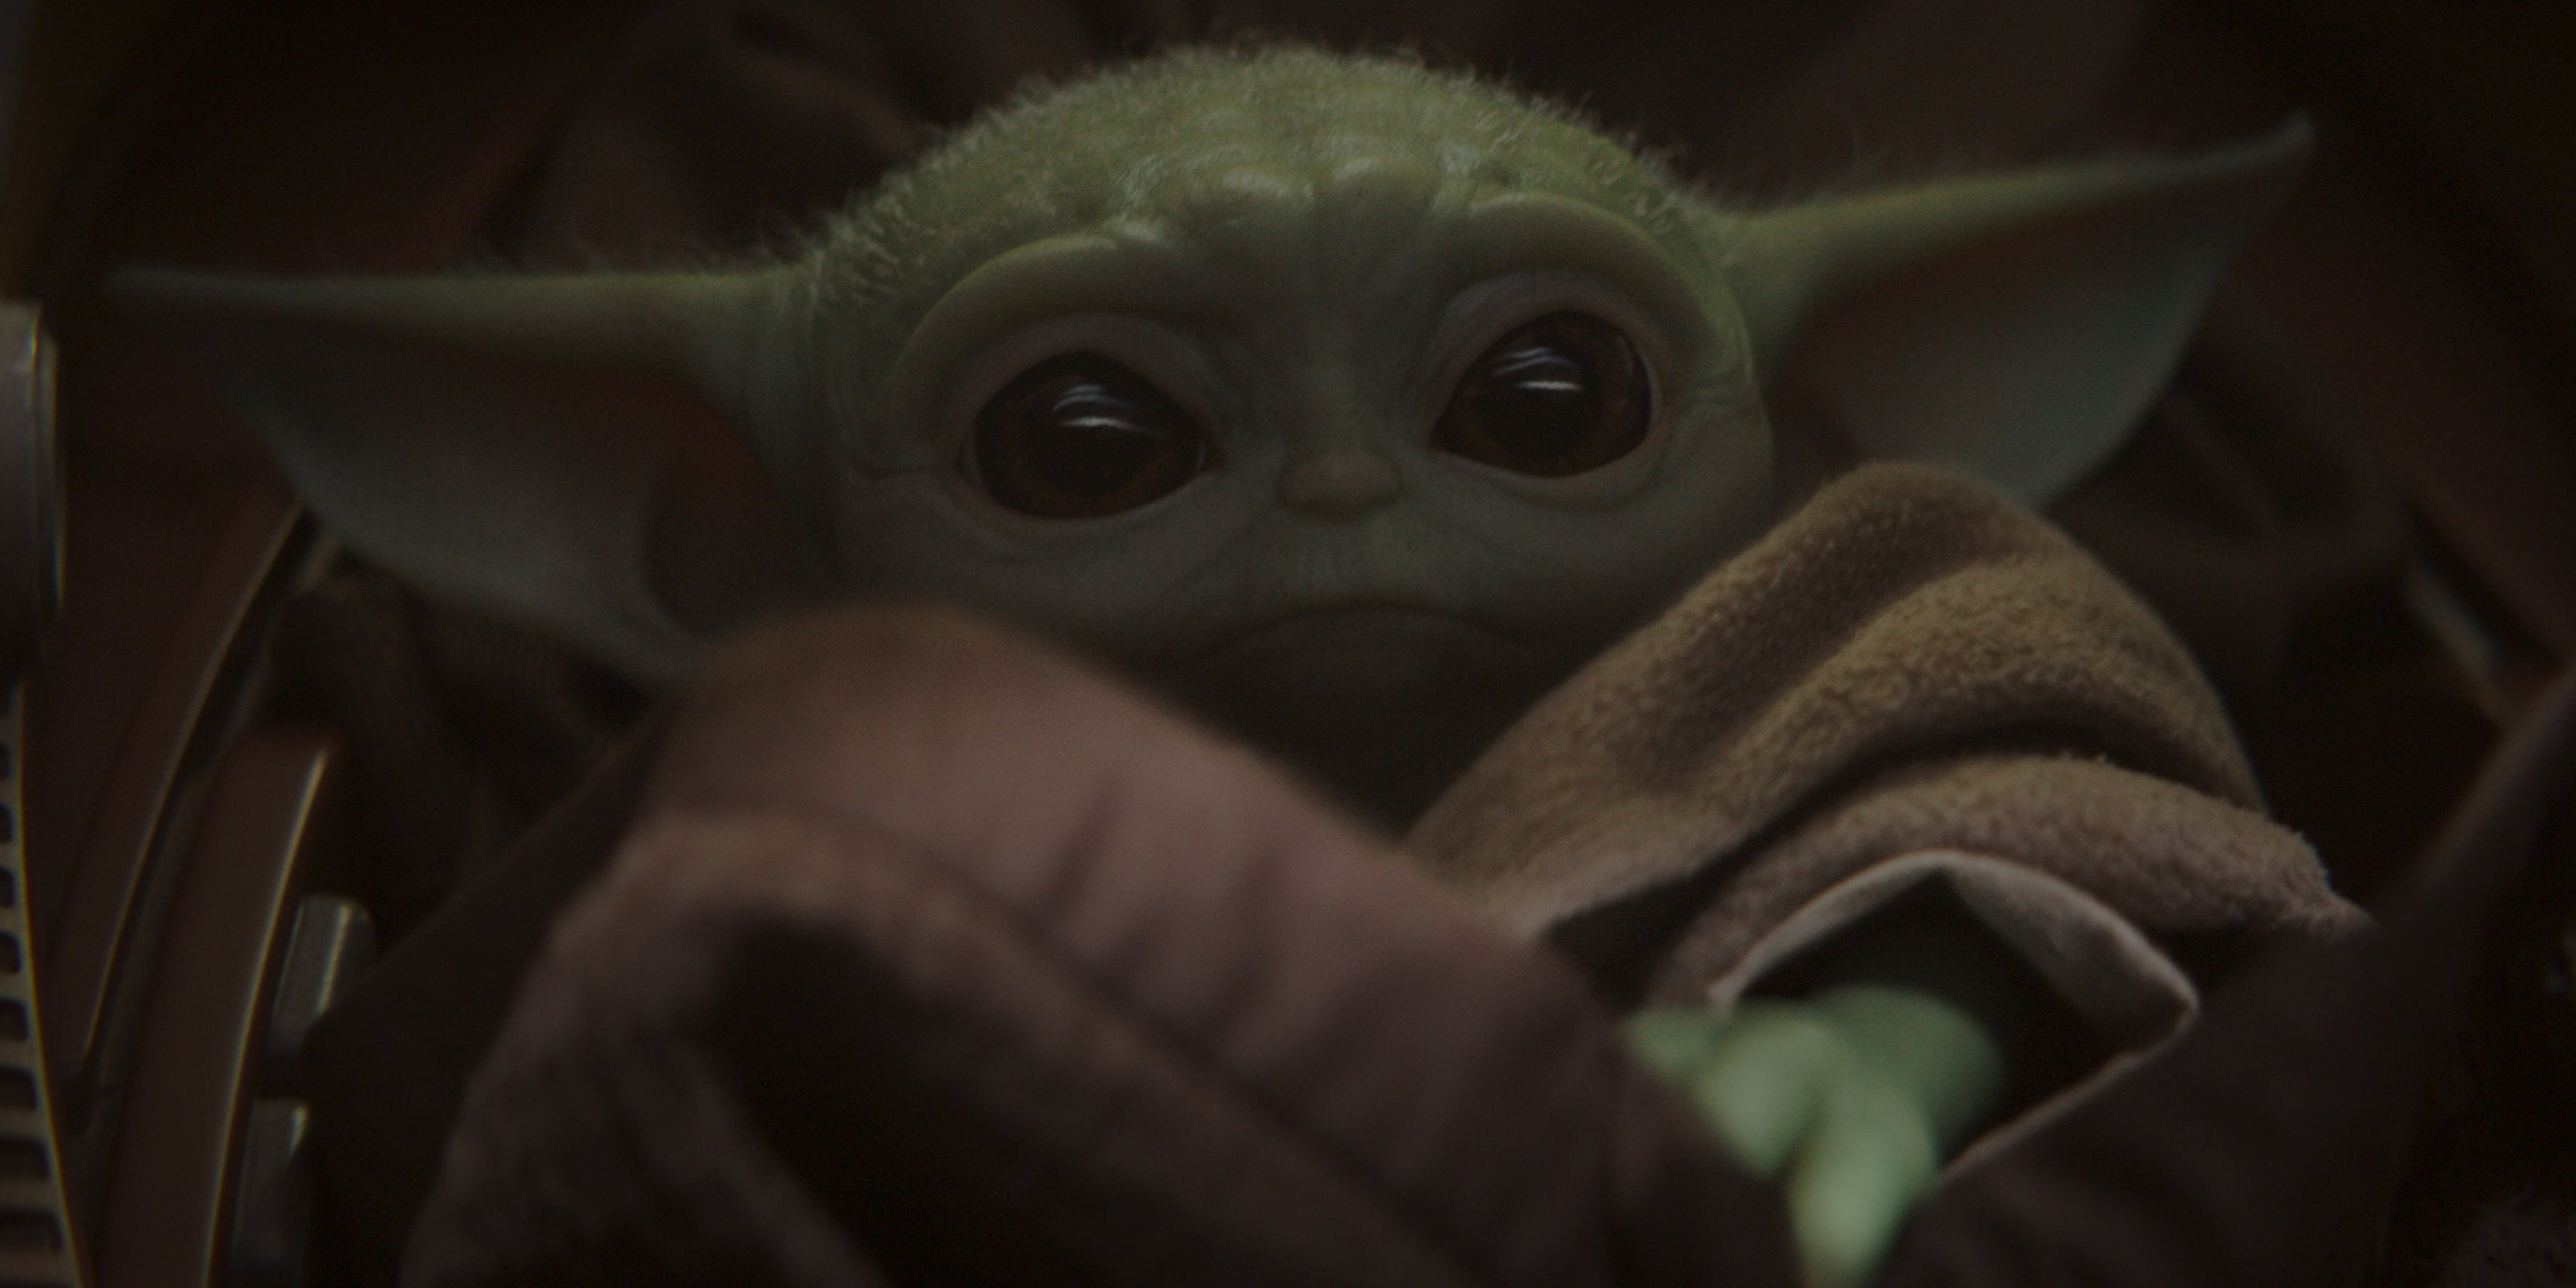 Is Baby Yoda Alive During the Star Wars Movies? | POPSUGAR Entertainment